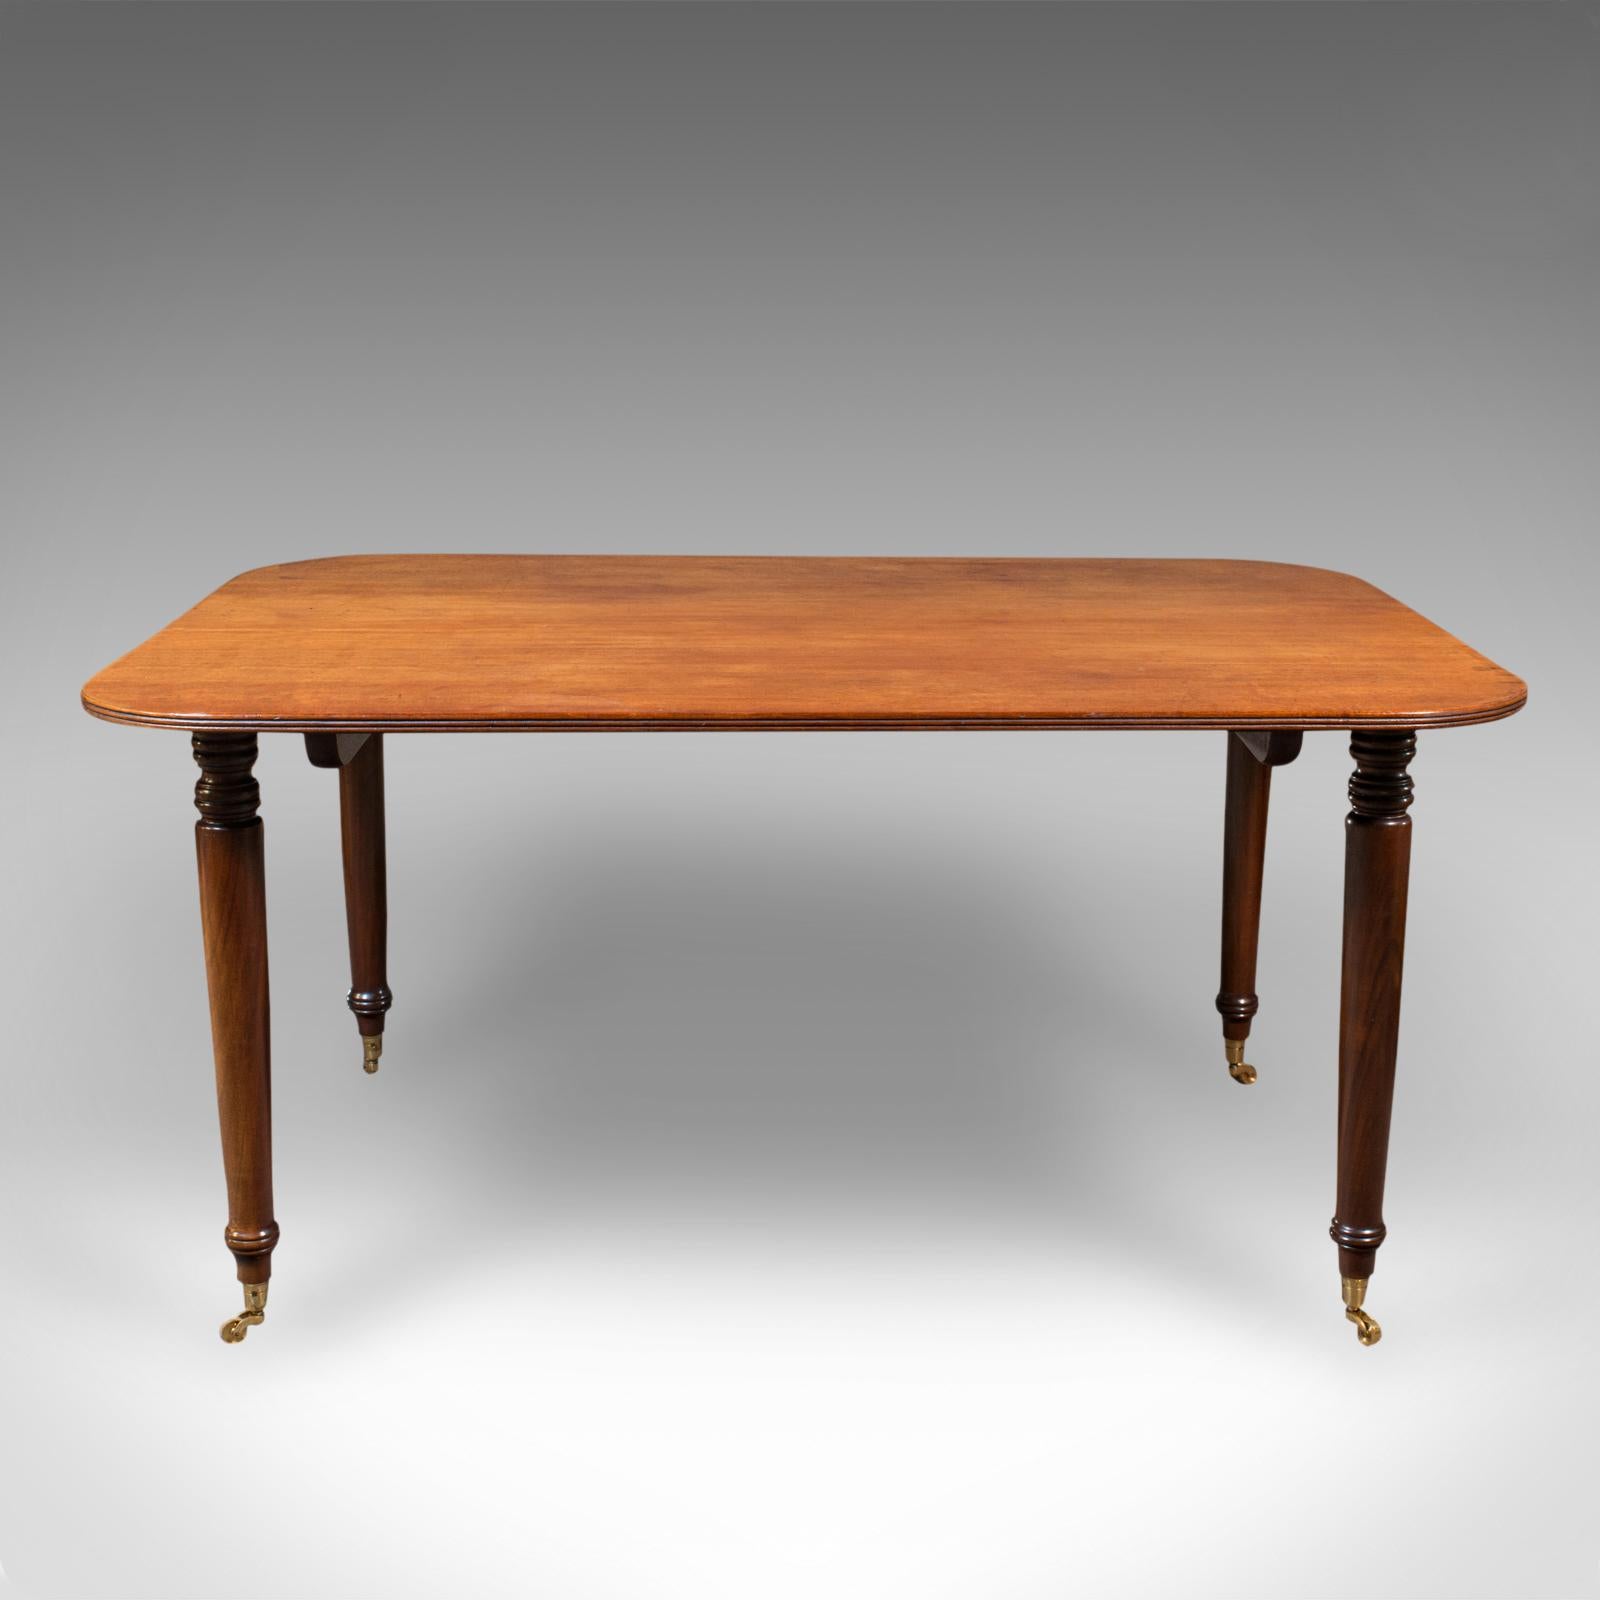 This is an antique breakfast table. An English, mahogany 4-6 seat dining table, dating to the Victorian period and later, circa 1900.

Generously sized for dining with loved ones or small social gatherings
Displays a desirable aged patina and in